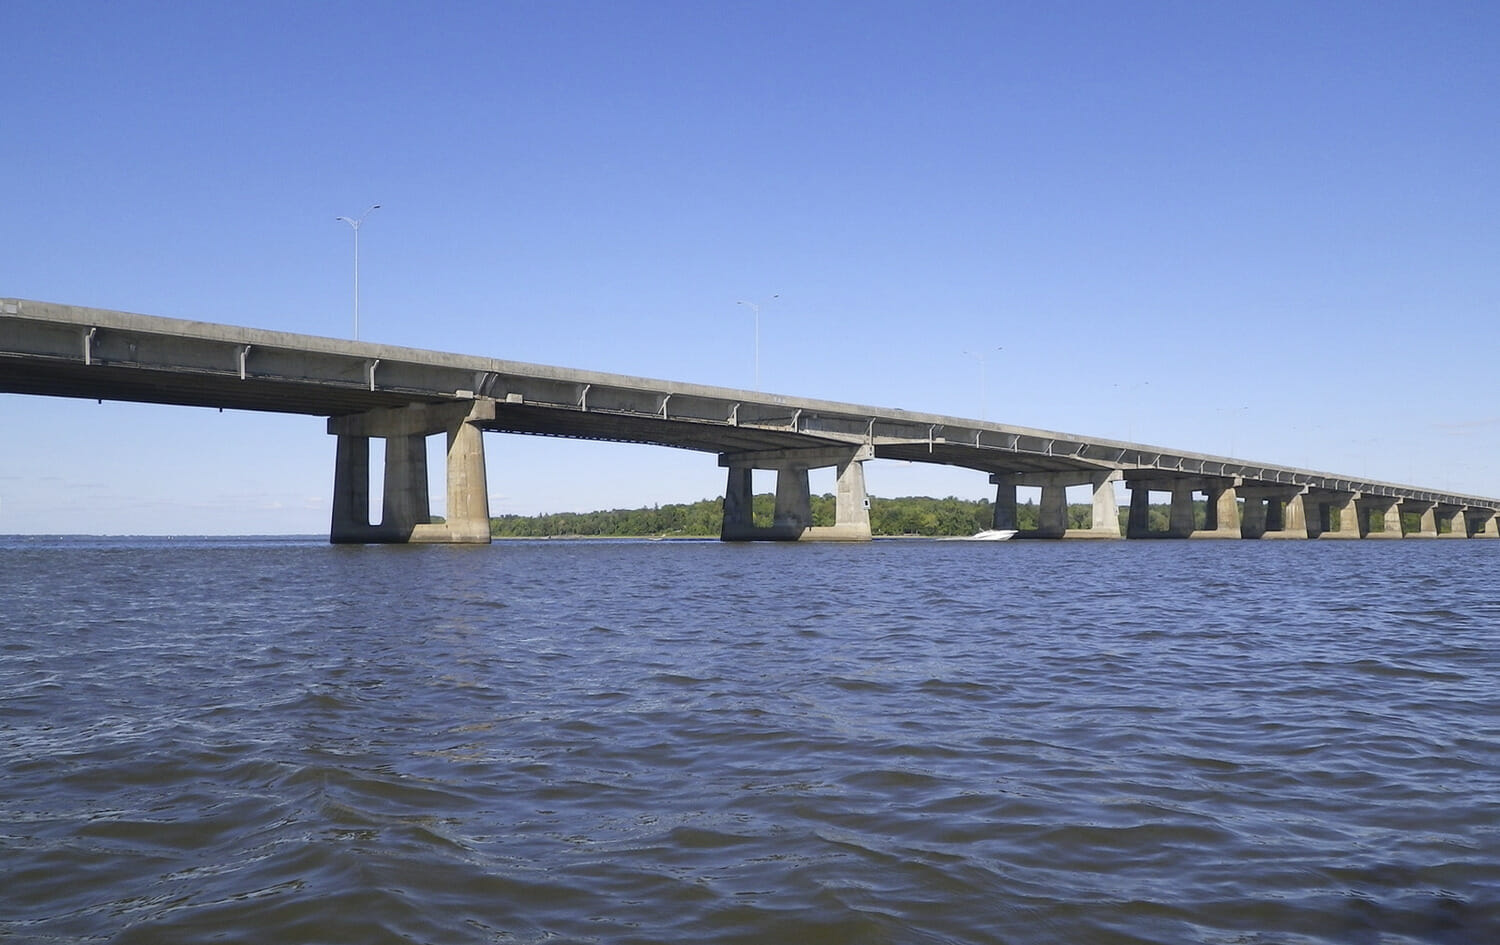 A large bridge spanning over a body of water.